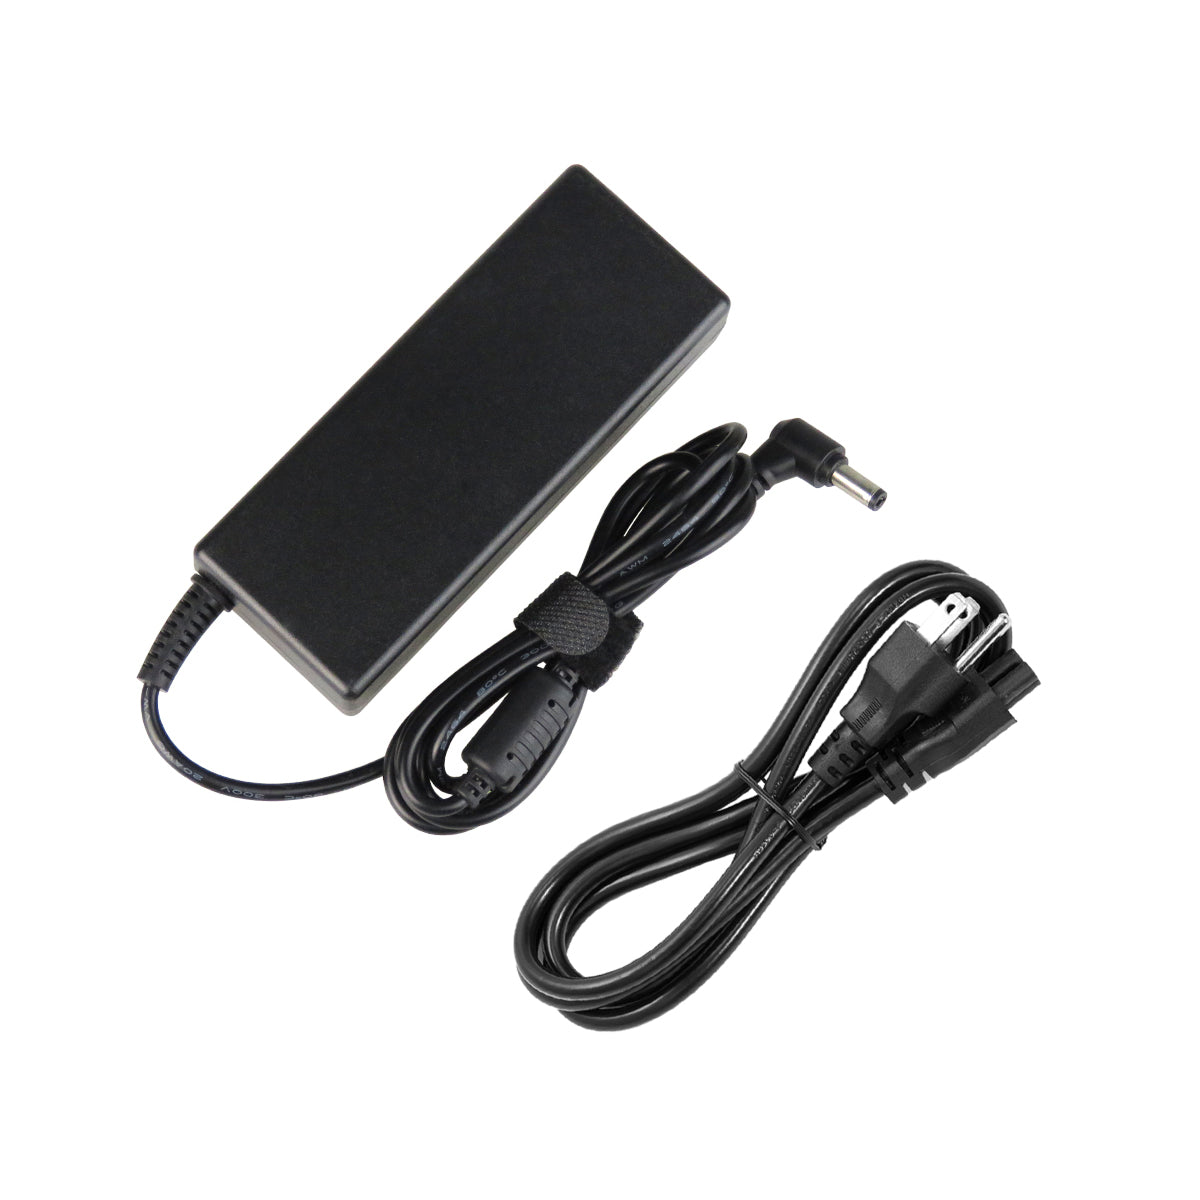 AC Adapter Charger for ASUS X452ea Notebook.